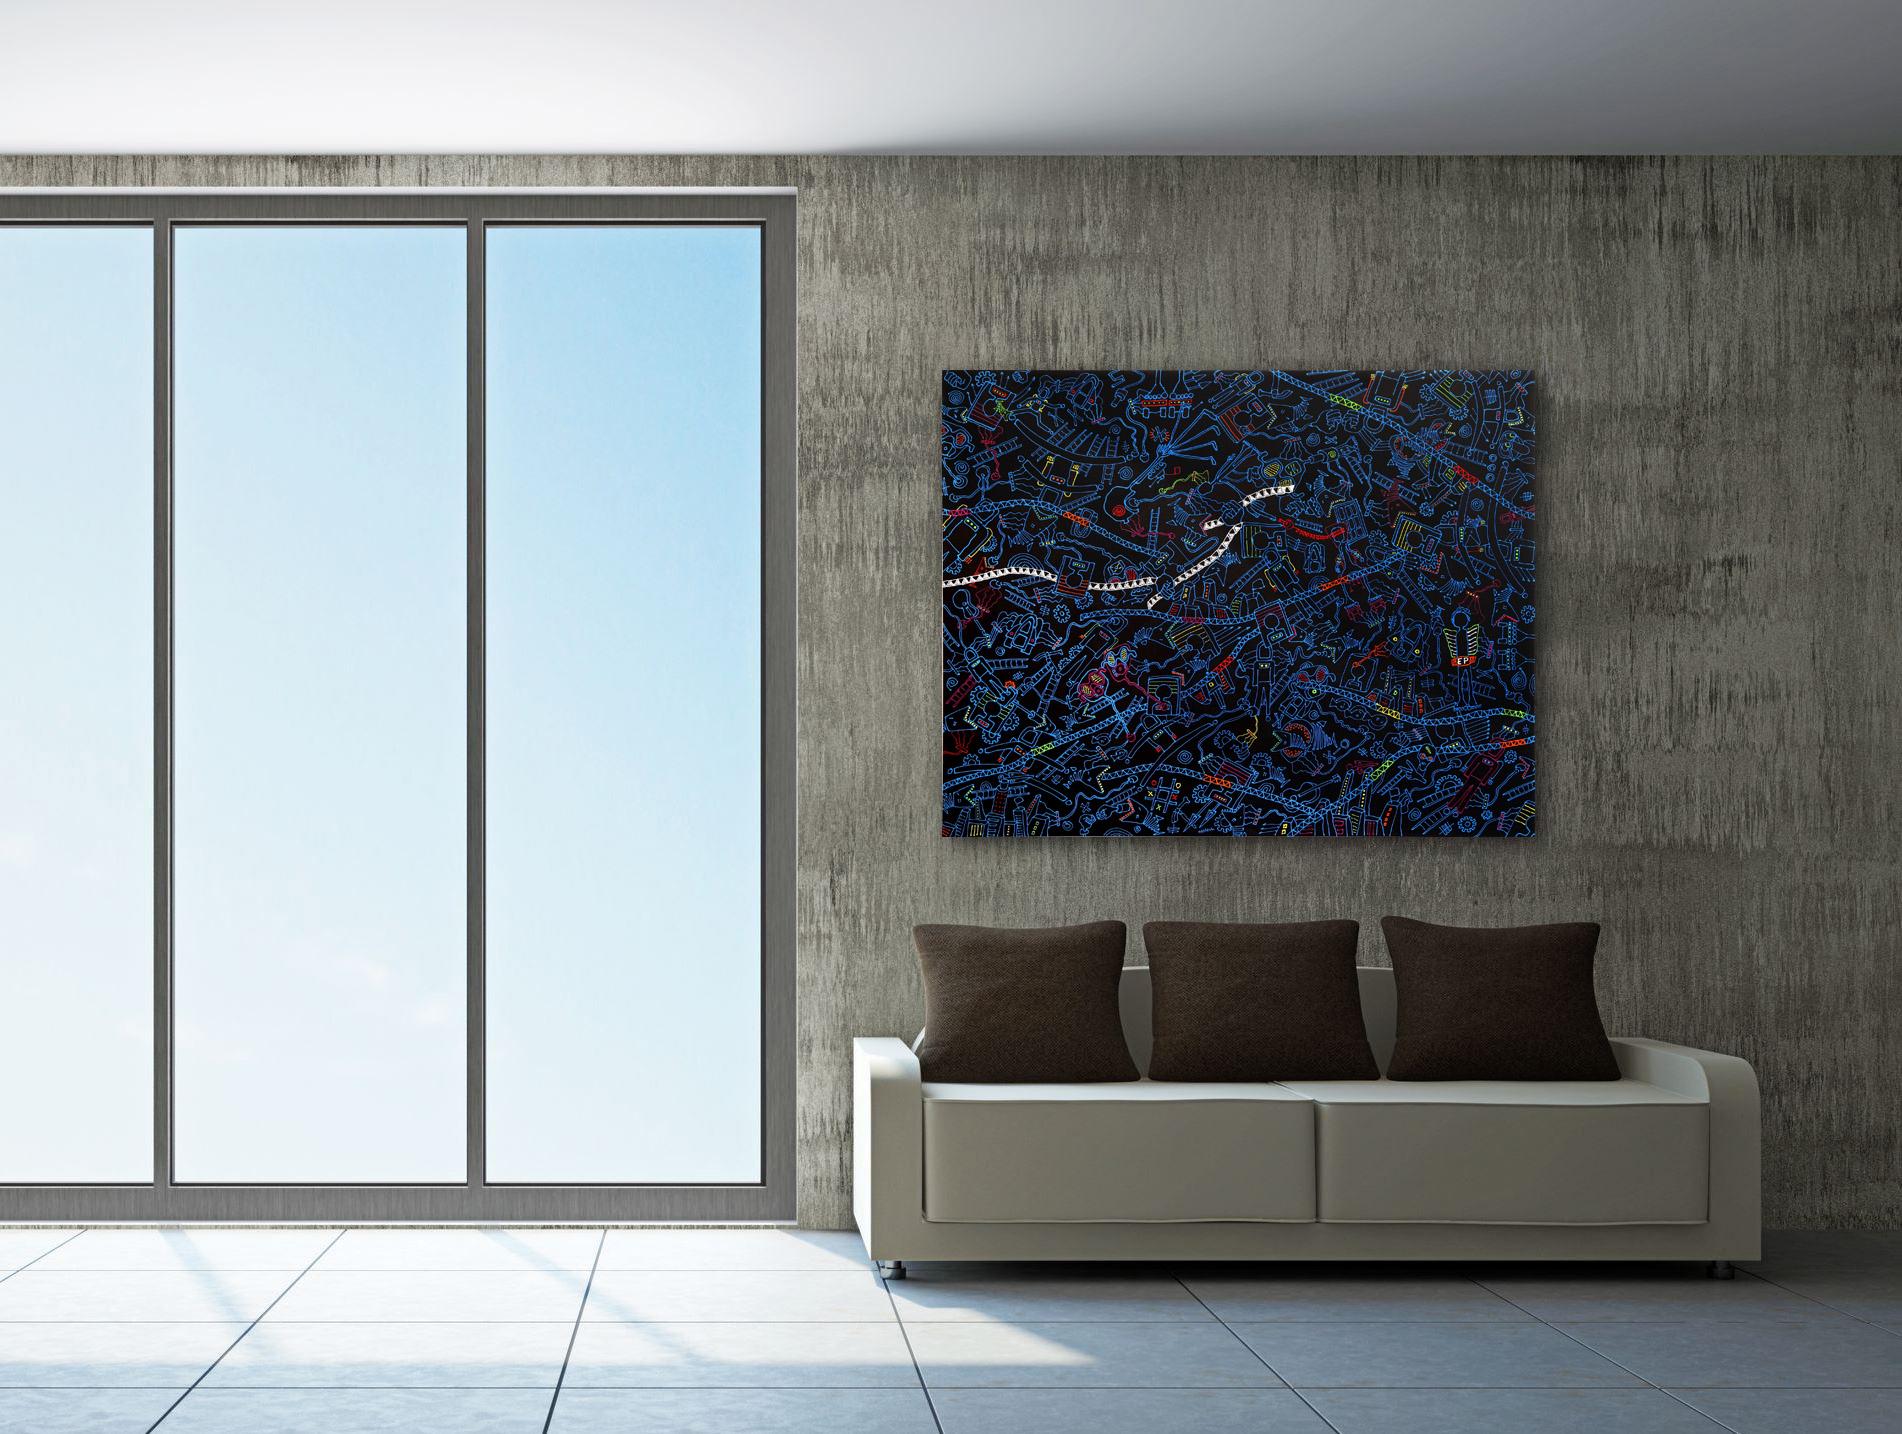 Space Junk 15 - Original One of a Kind Artwork on Canvas - Painting by Ricky Hunt